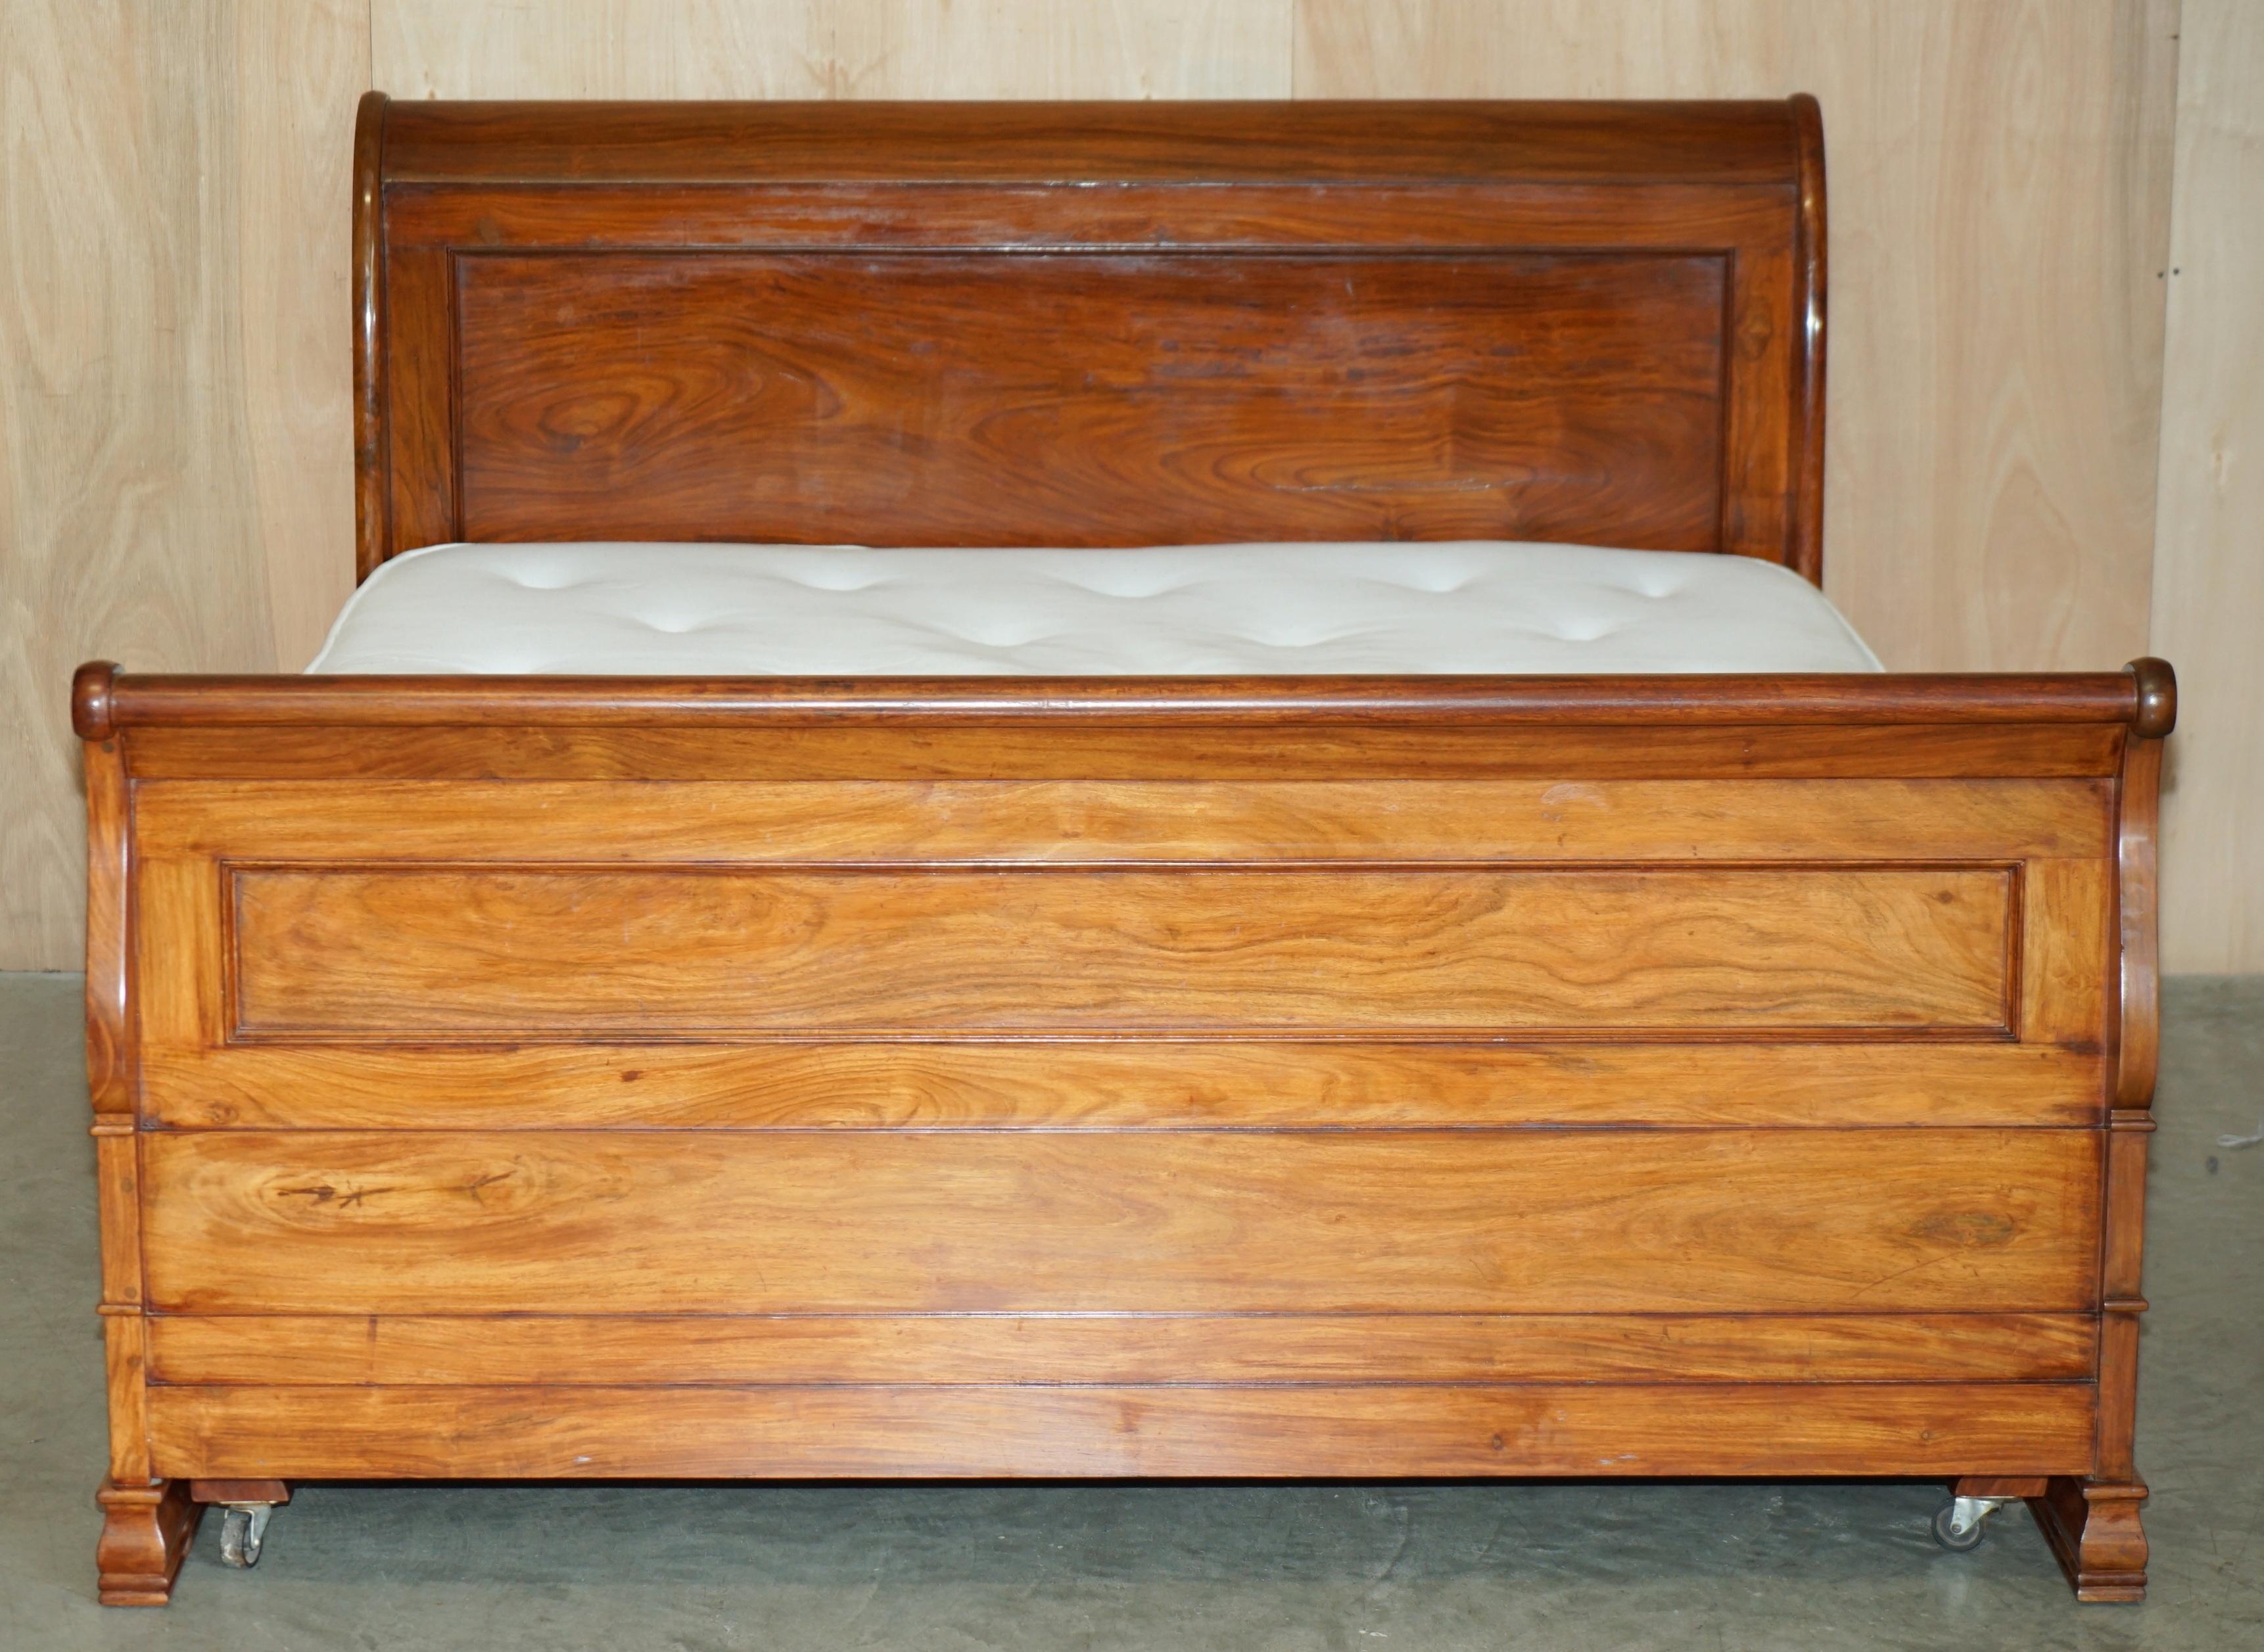 Royal House Antiques

Royal House Antiques is delighted to offer for sale this stunning solid Rosewood sleigh bed frame with a free super king size mattress!

Please note the delivery fee listed is just a guide, it covers within the M25 only for the